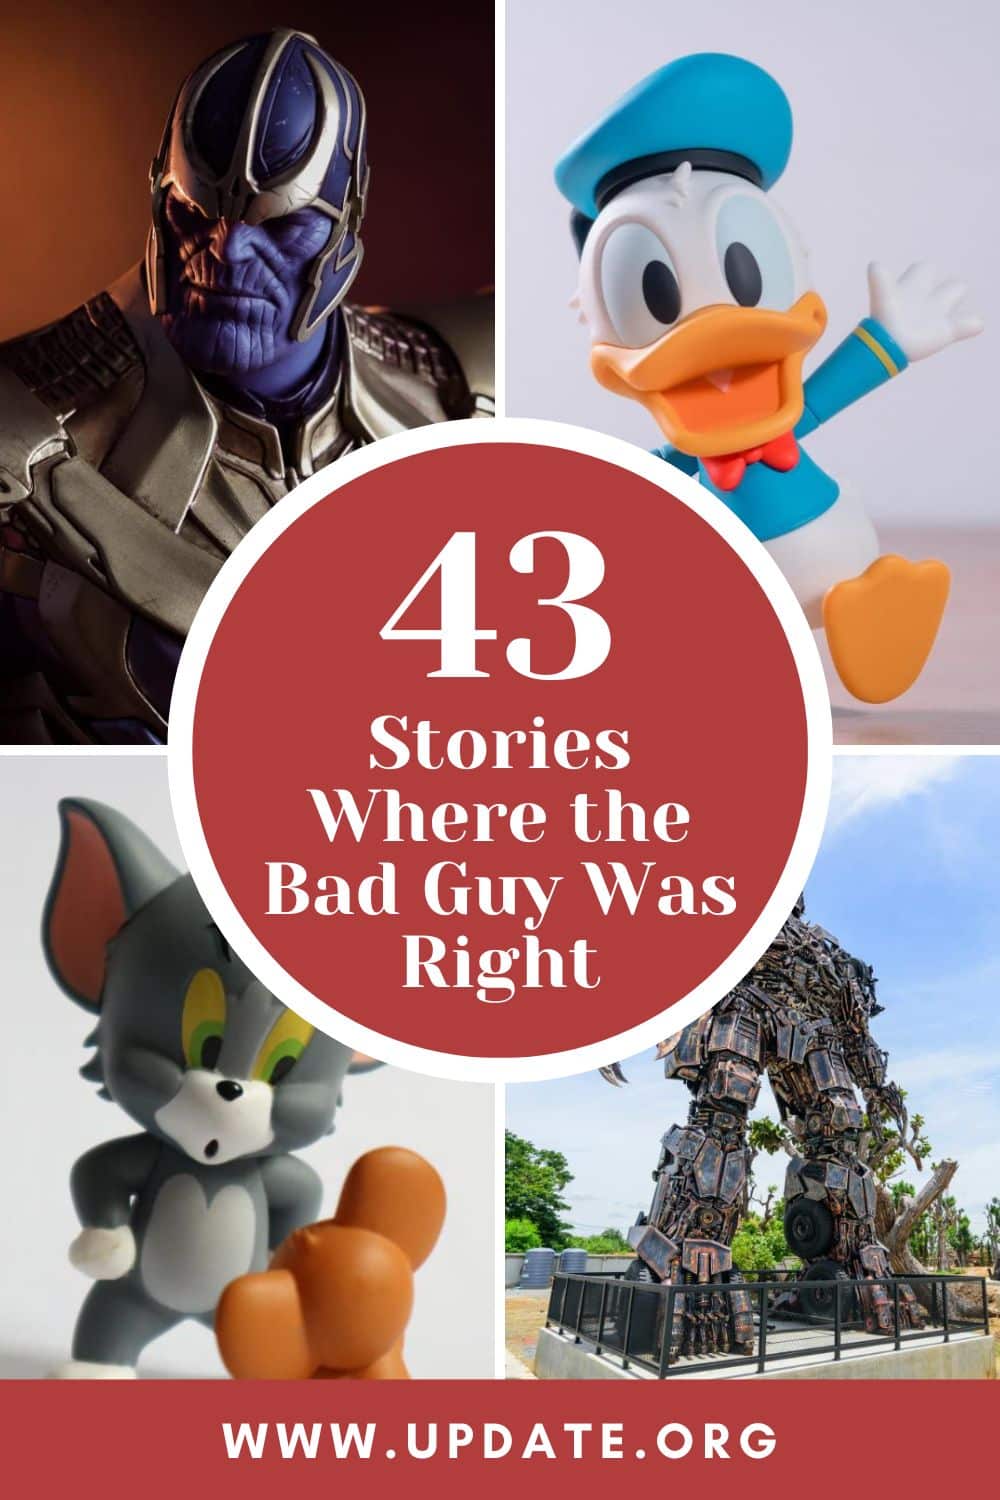 43 Stories Where the Bad Guy Was Right pinterest image.